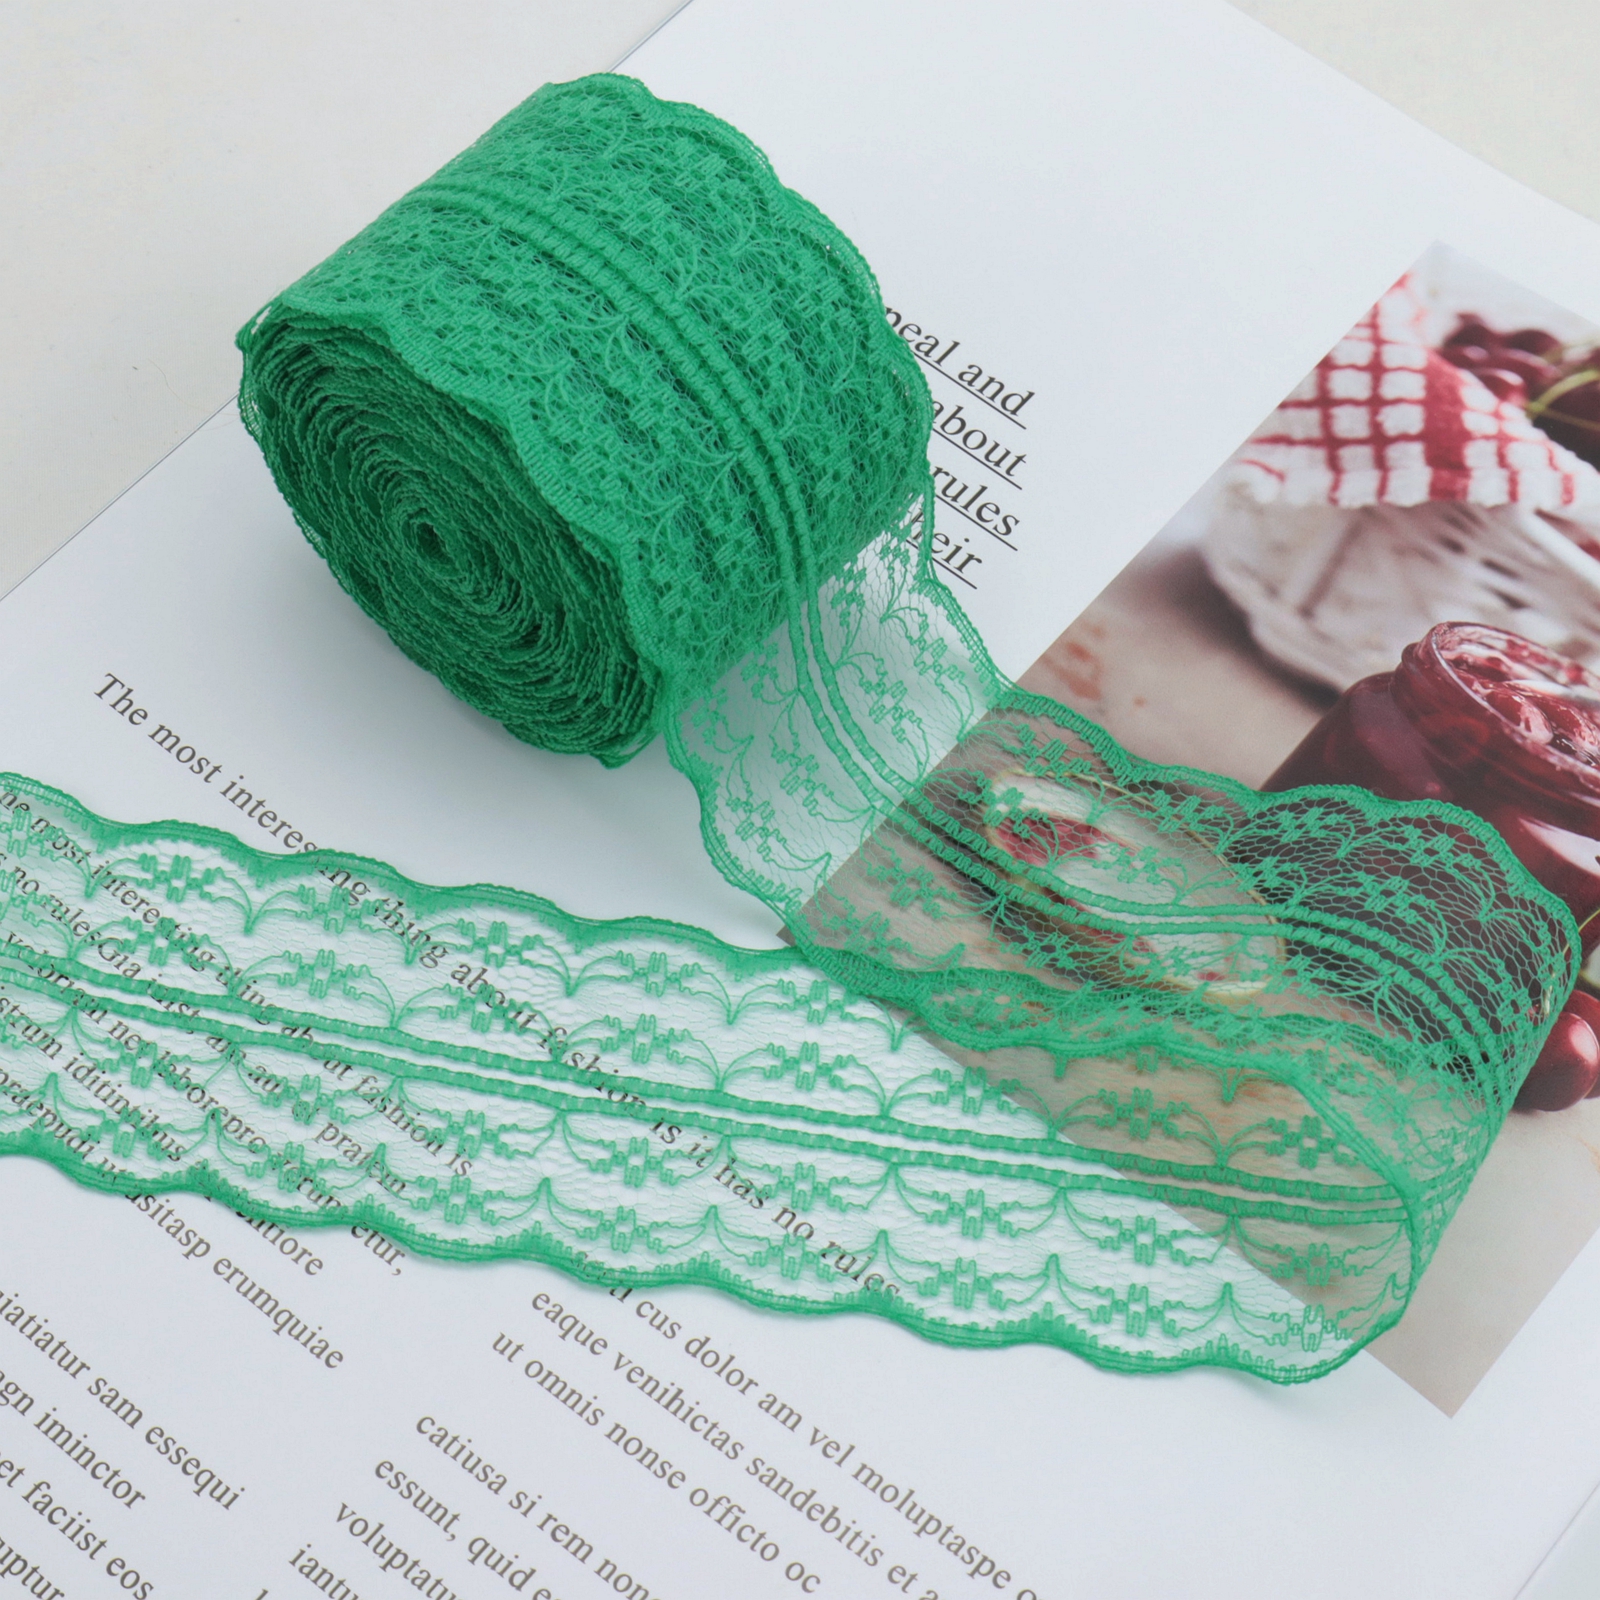  Light Green Lace Trim Ribbons, 10 Yards Assorted